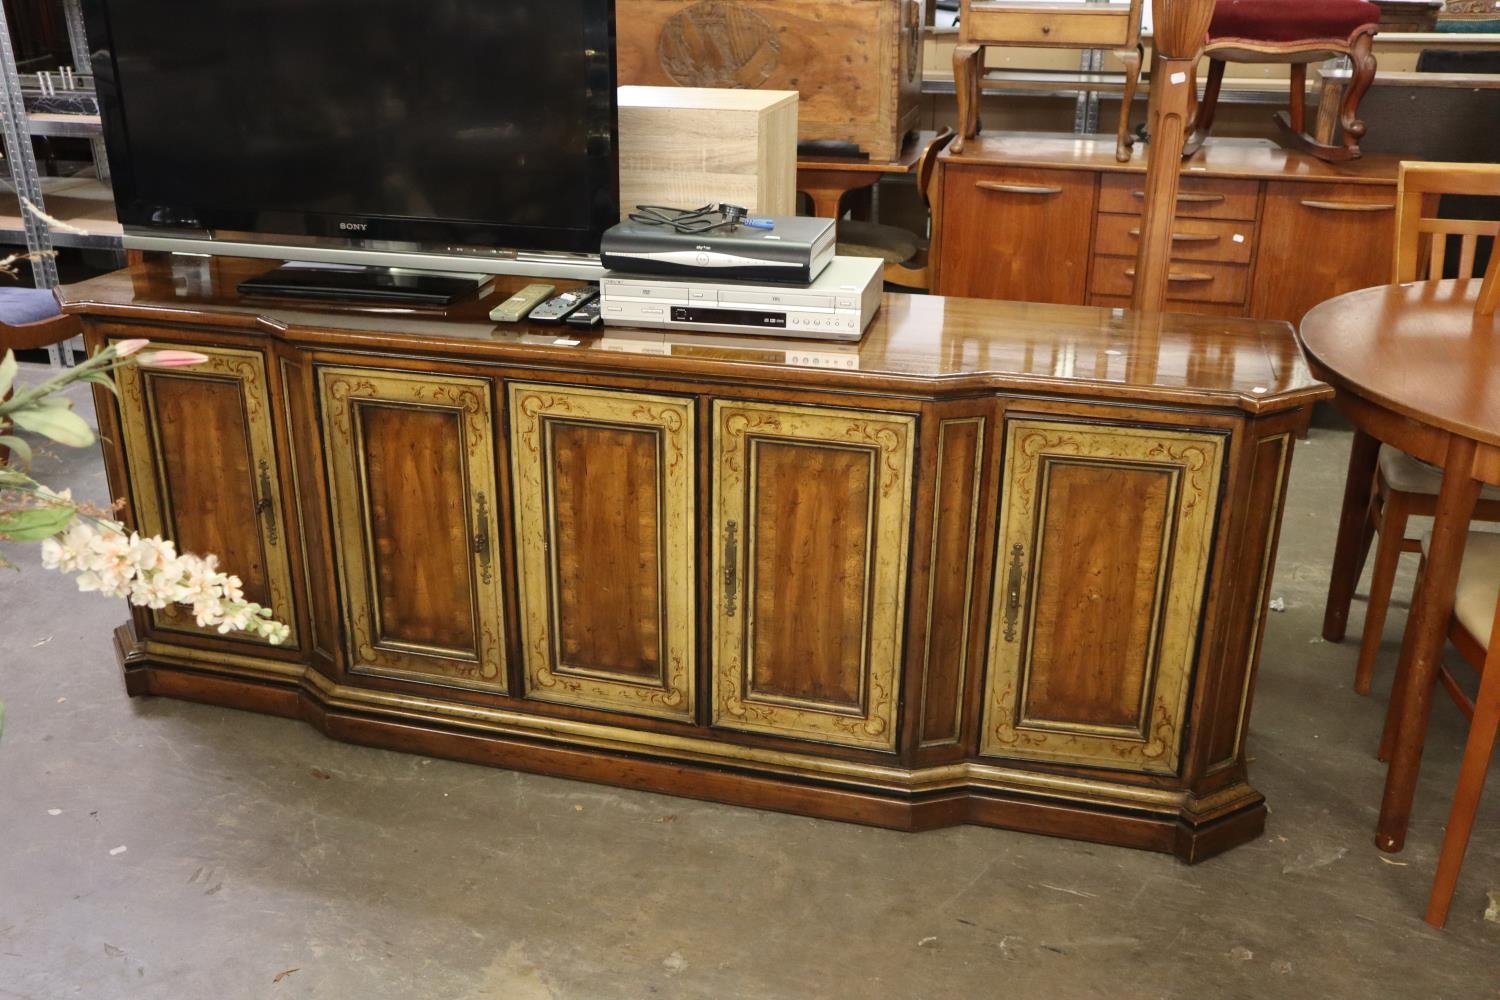 WARING & GILLOW AMERICAN WALNUT SIDEBOARD, WITH ADVANCED BREAKFRONT AND CANTED FORECORNERS, ENCLOSED